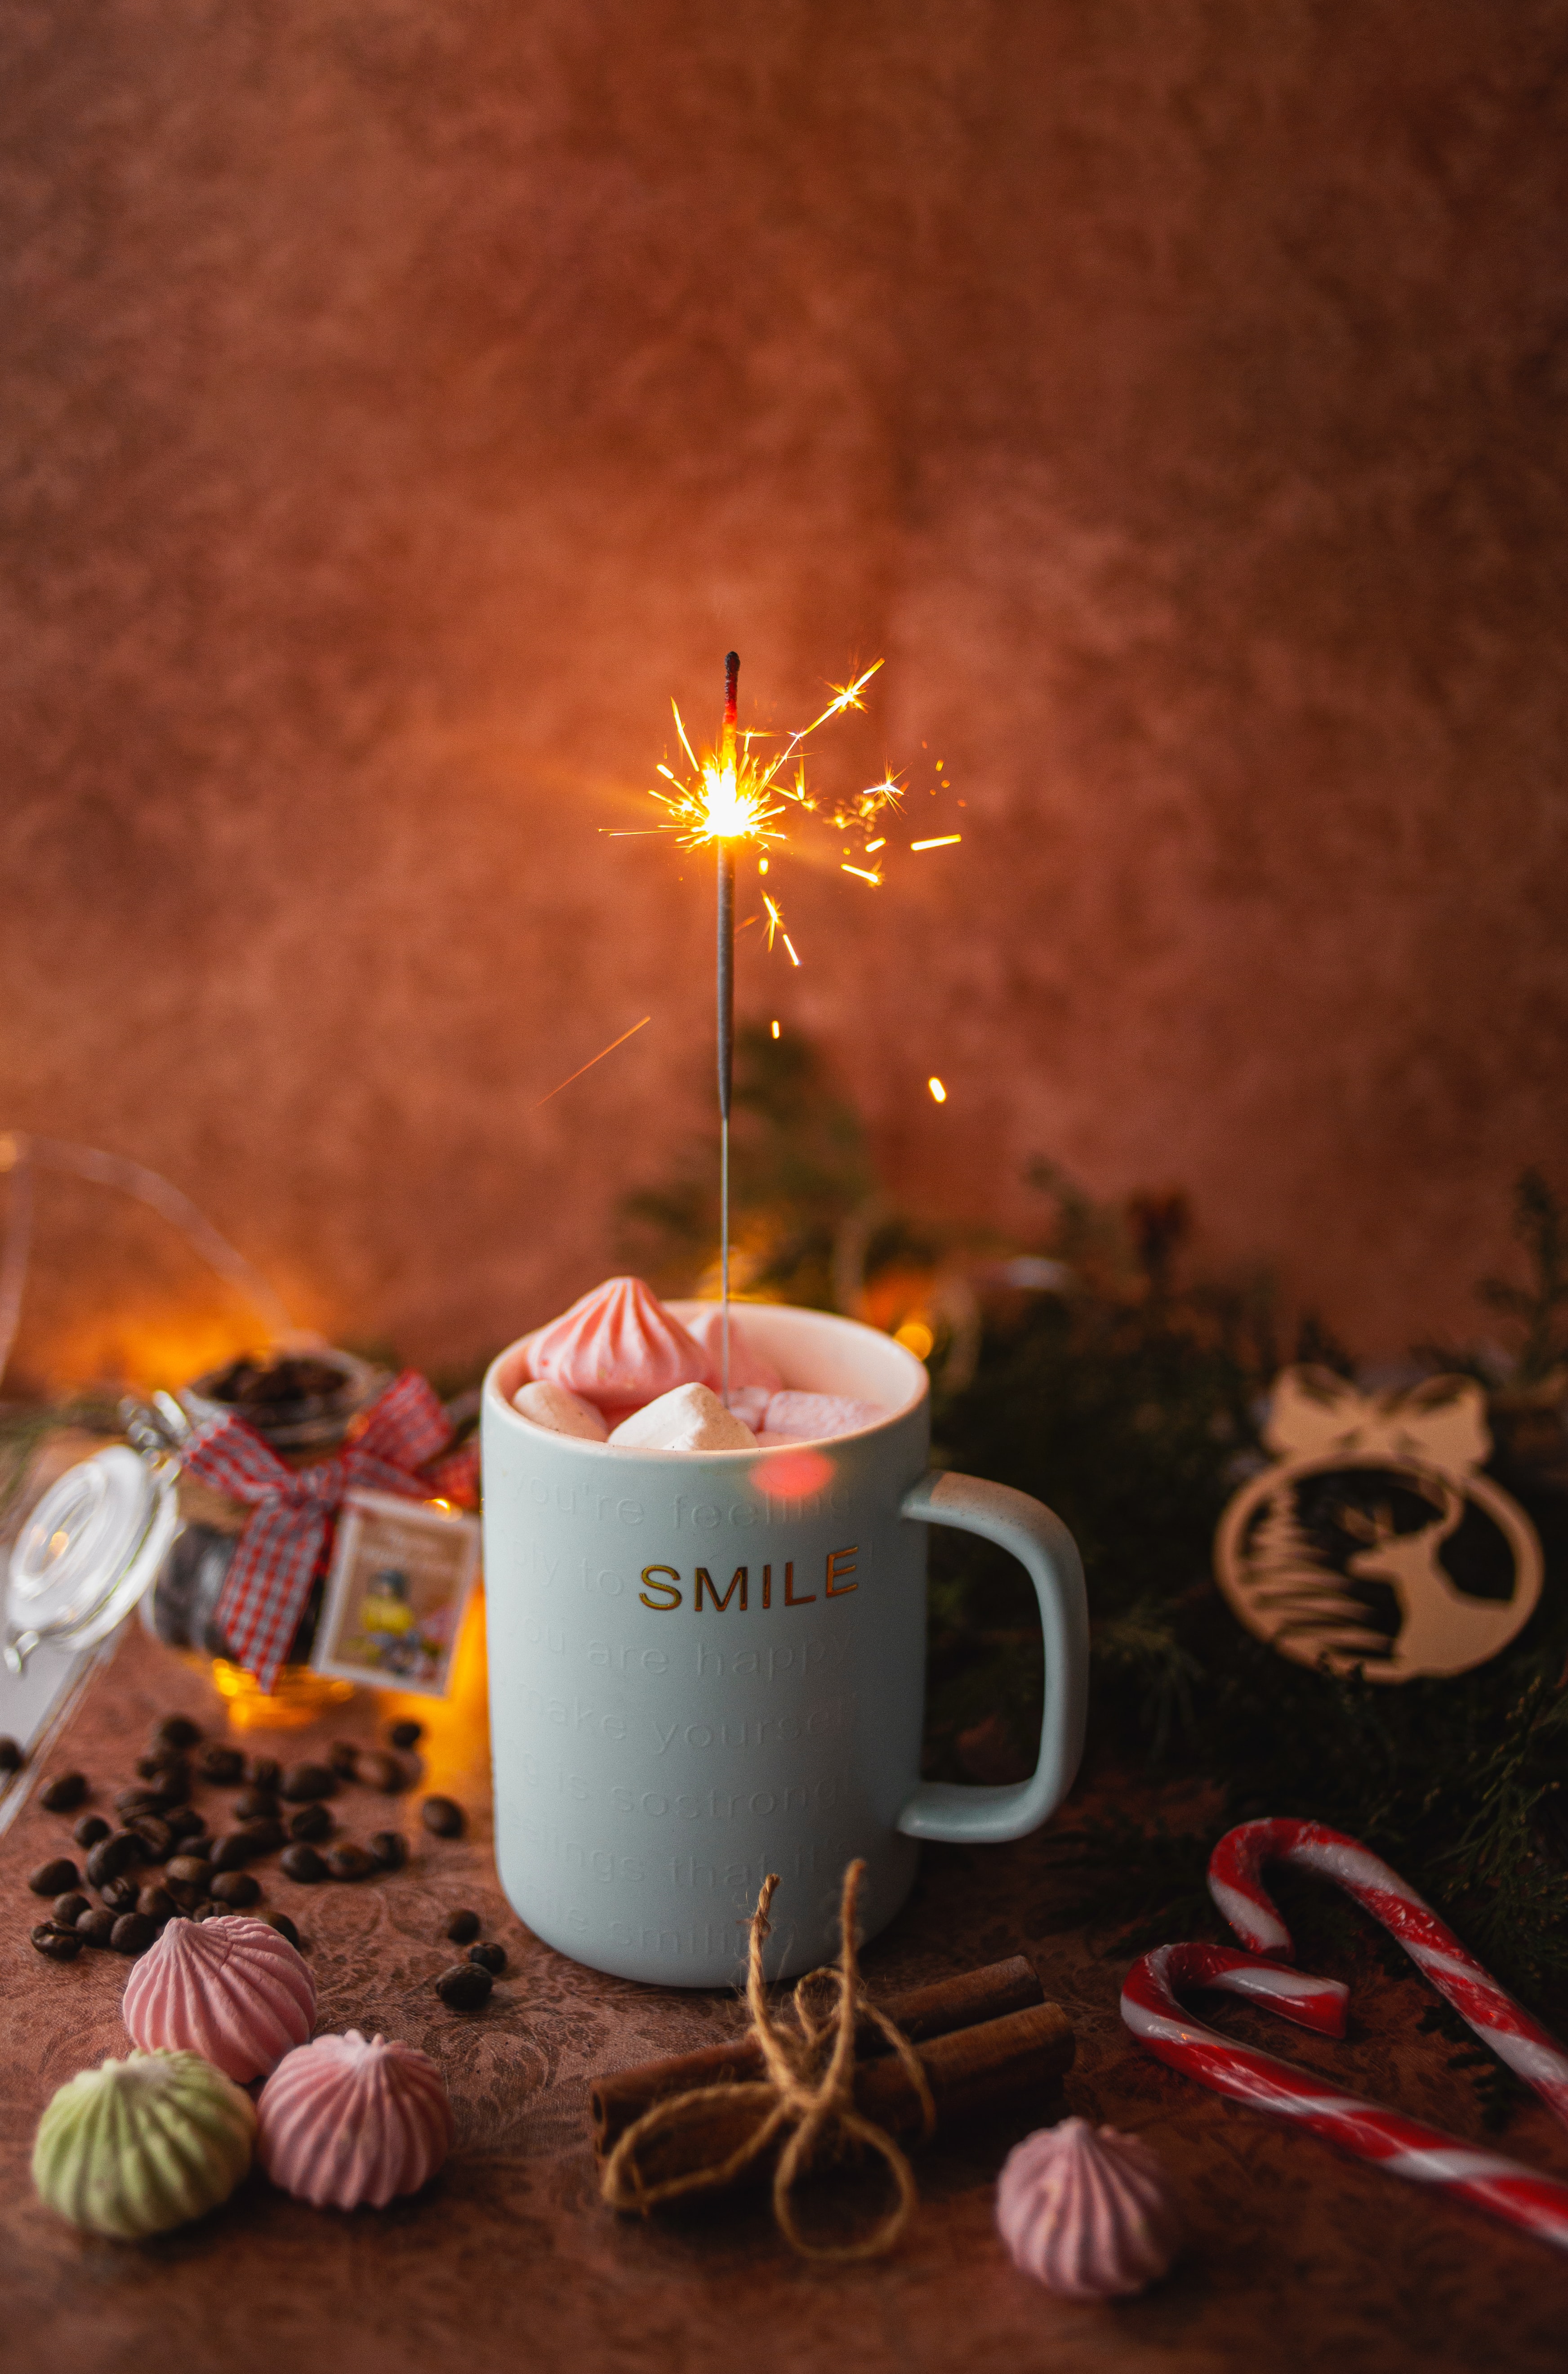 mug, miscellanea, cup, holiday, sparks, miscellaneous, marshmallow, bengal lights, sparklers, zephyr 2160p